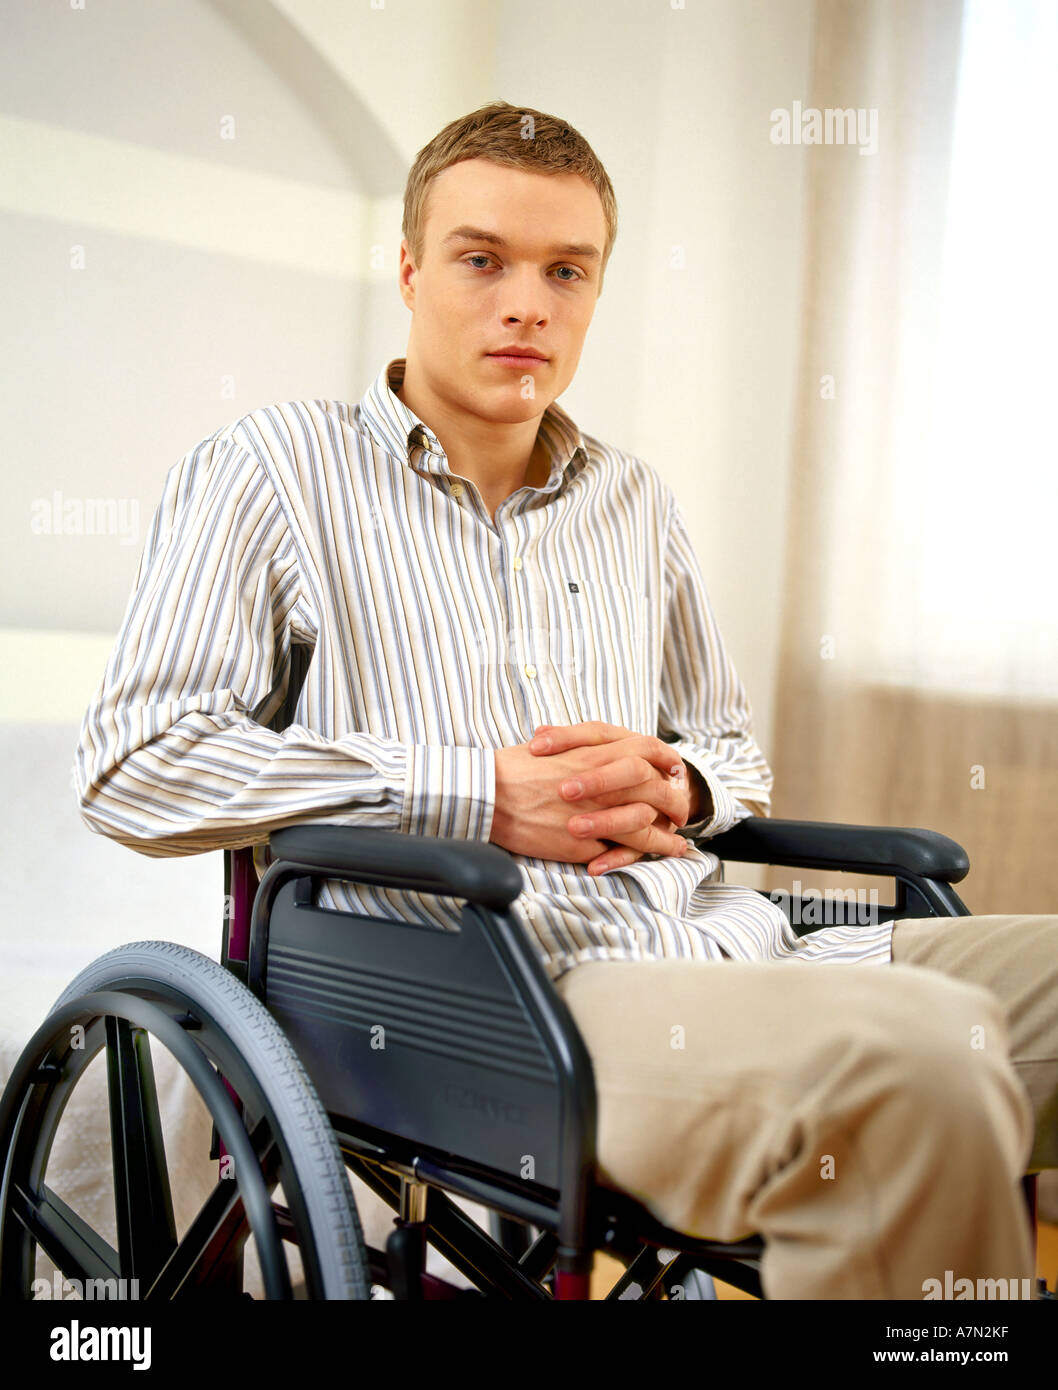 indoor flat room livingroom man young boy 20 25 blonde shirt stripe stripes  striped sit wheelchair invalid disabled rest rela Stock Photo - Alamy